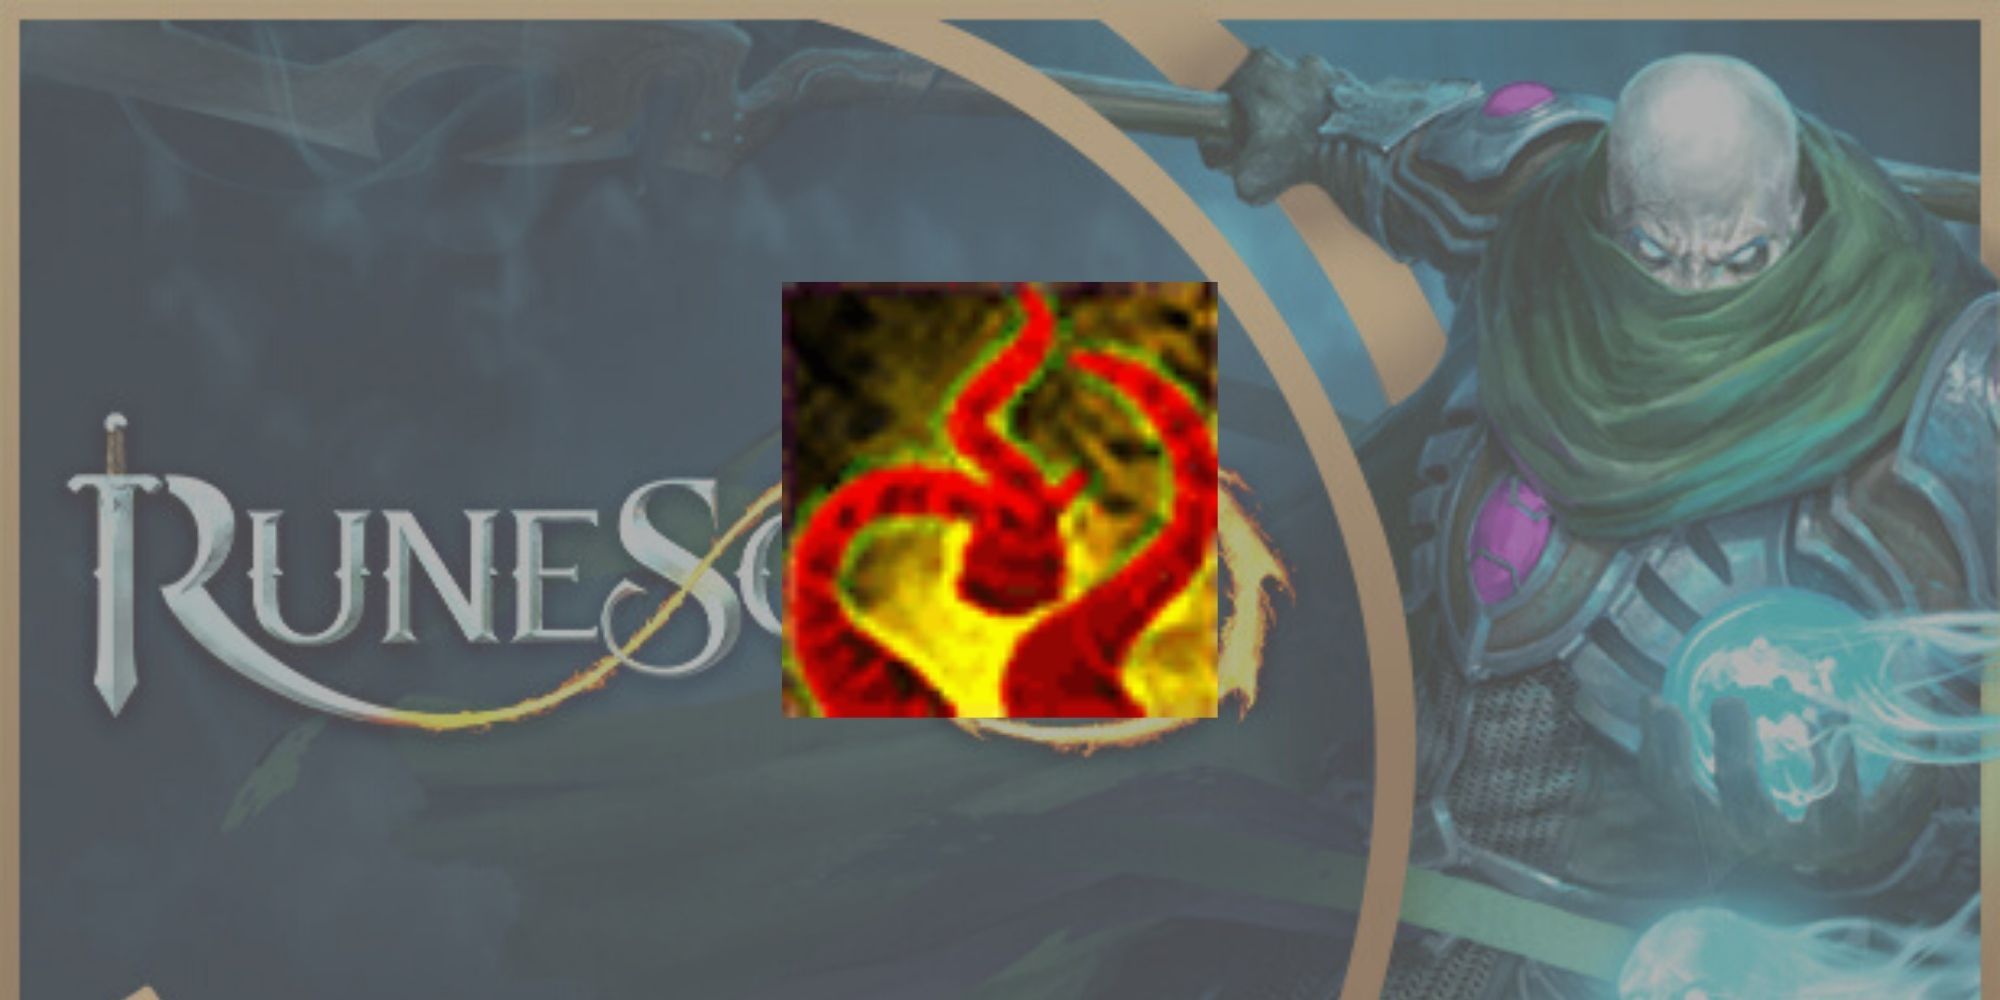 The Blood Tendrils melee ability icon superimposed over an official RuneScape 3 promo image.